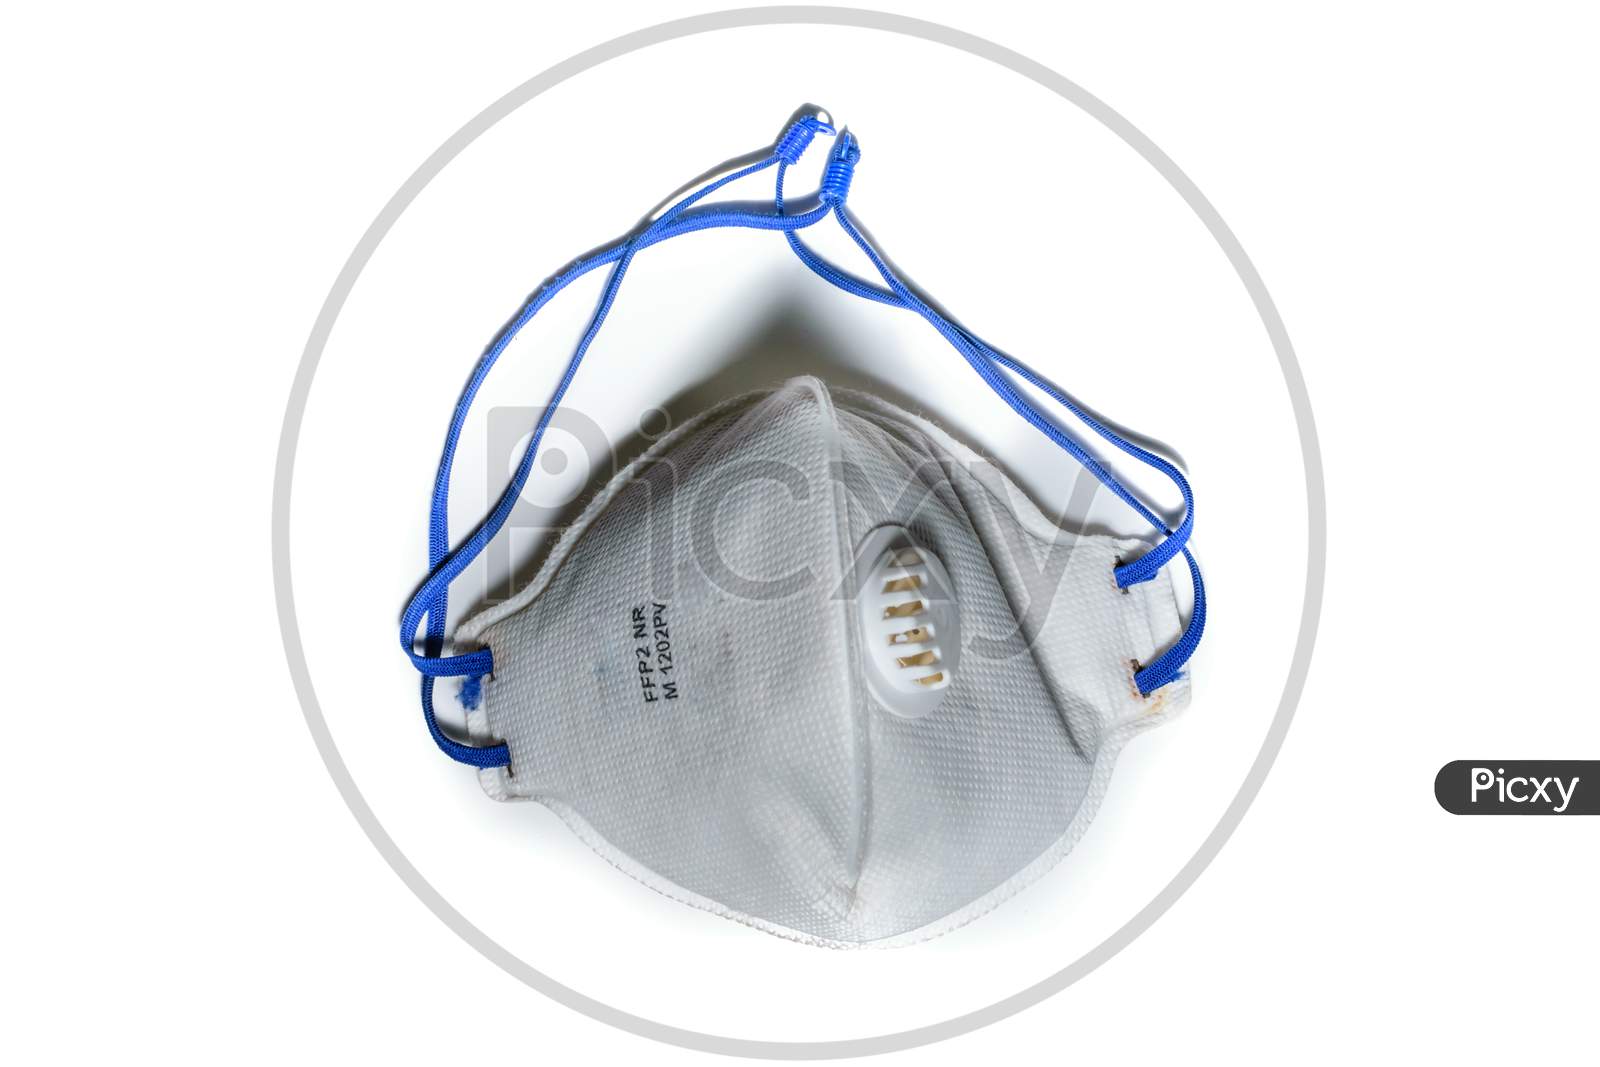 N95 Mask In A White Background To Wear For Combating Covid 19 Infection